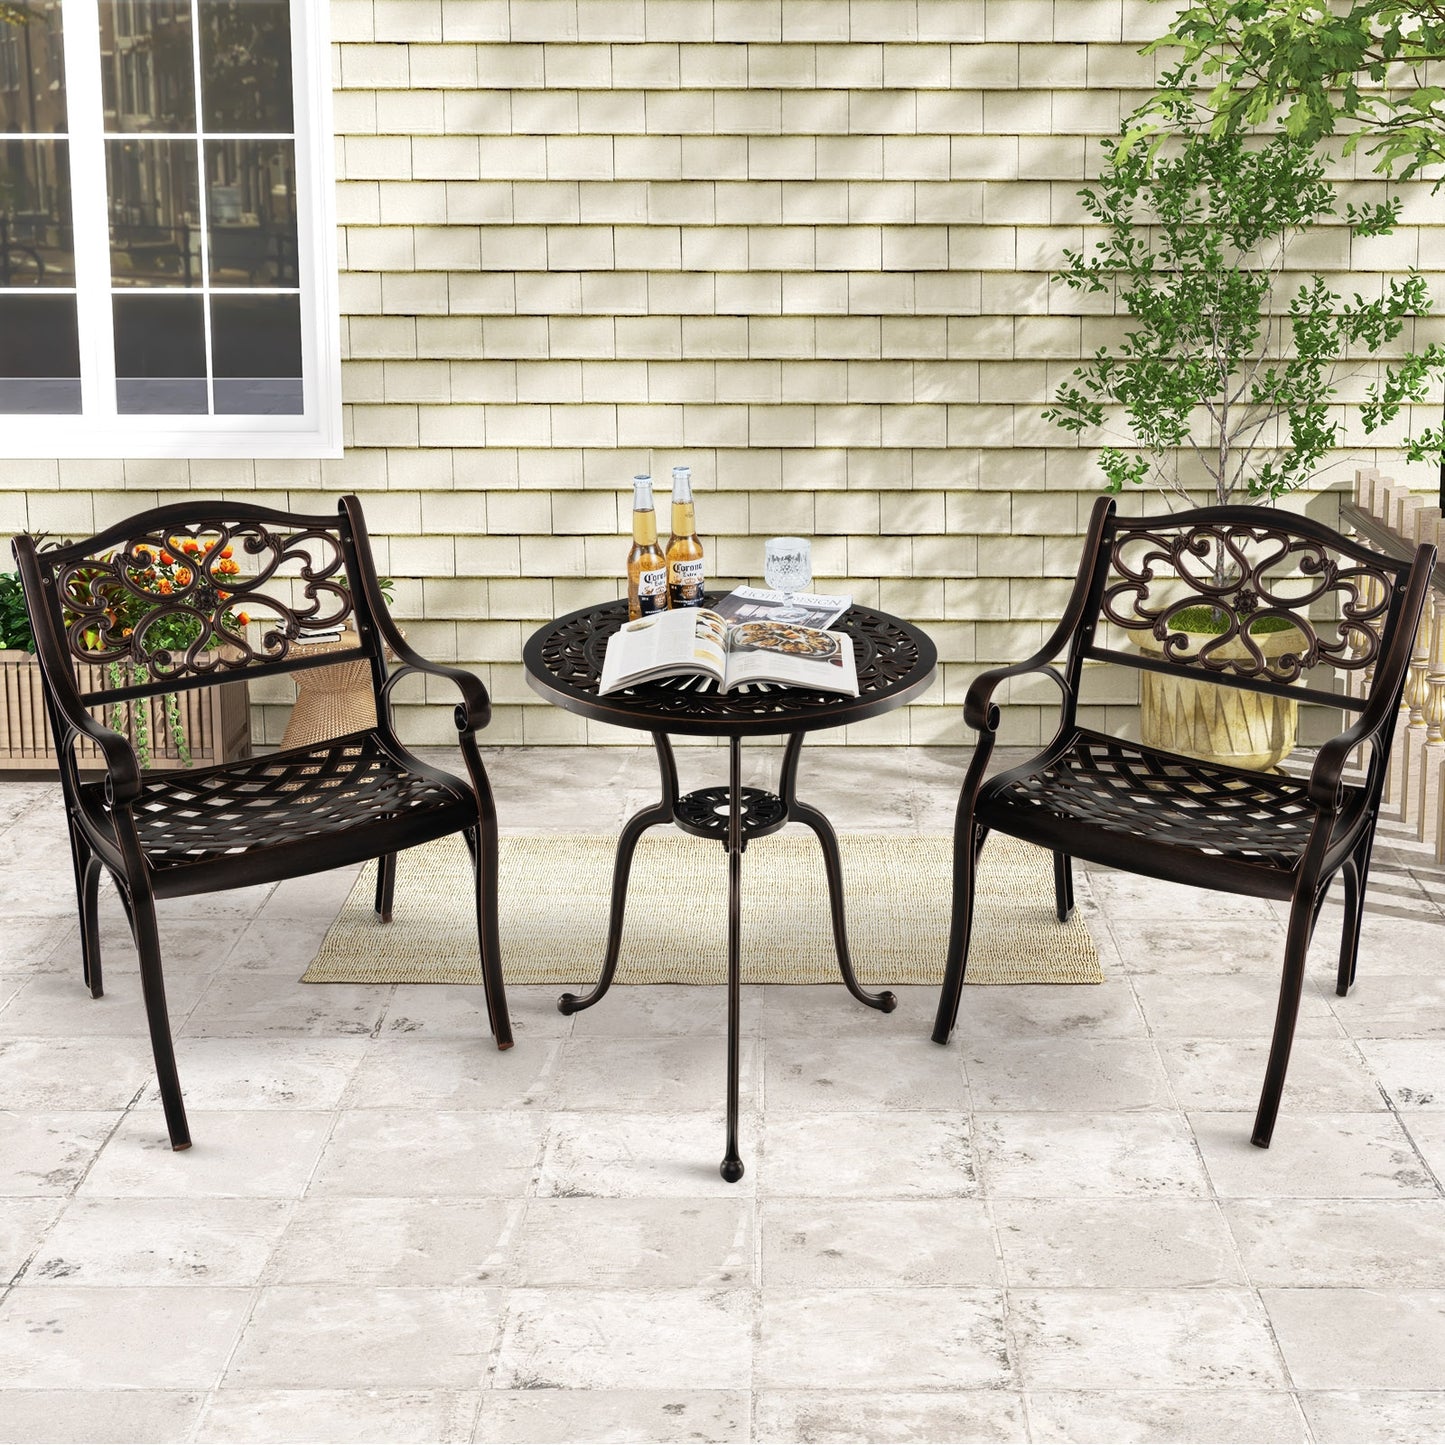 Cast Aluminum Dining Chairs Set of 2 with Patio Chairs Armrests Flower Pattern-Bronze